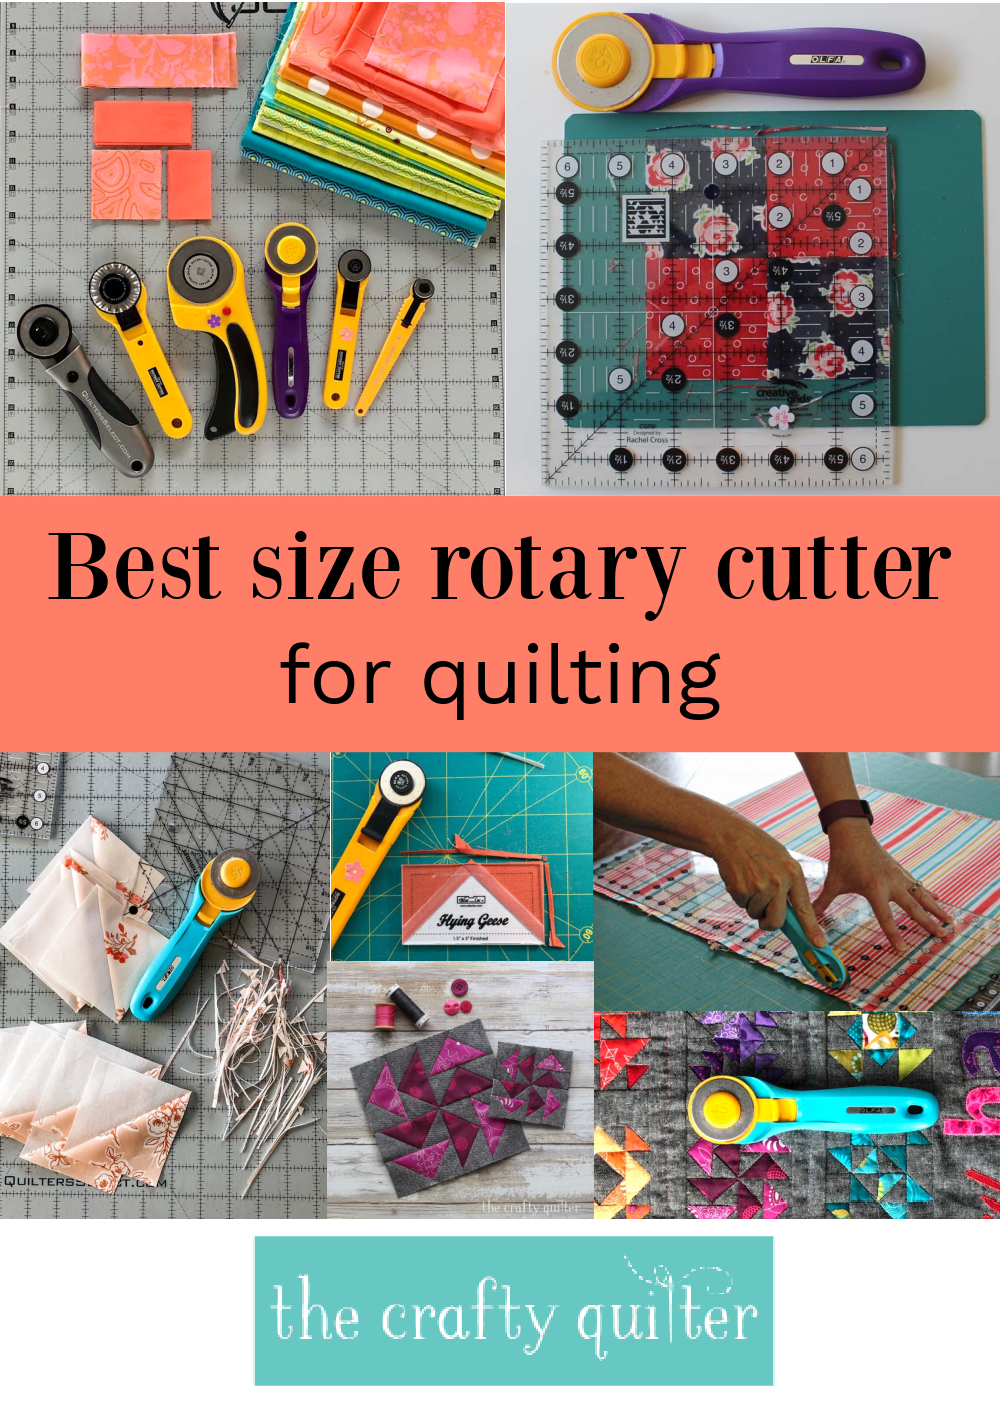 This guide to rotary cutter sizes has everything you need to know about their purpose and which one is best all around for quilting!